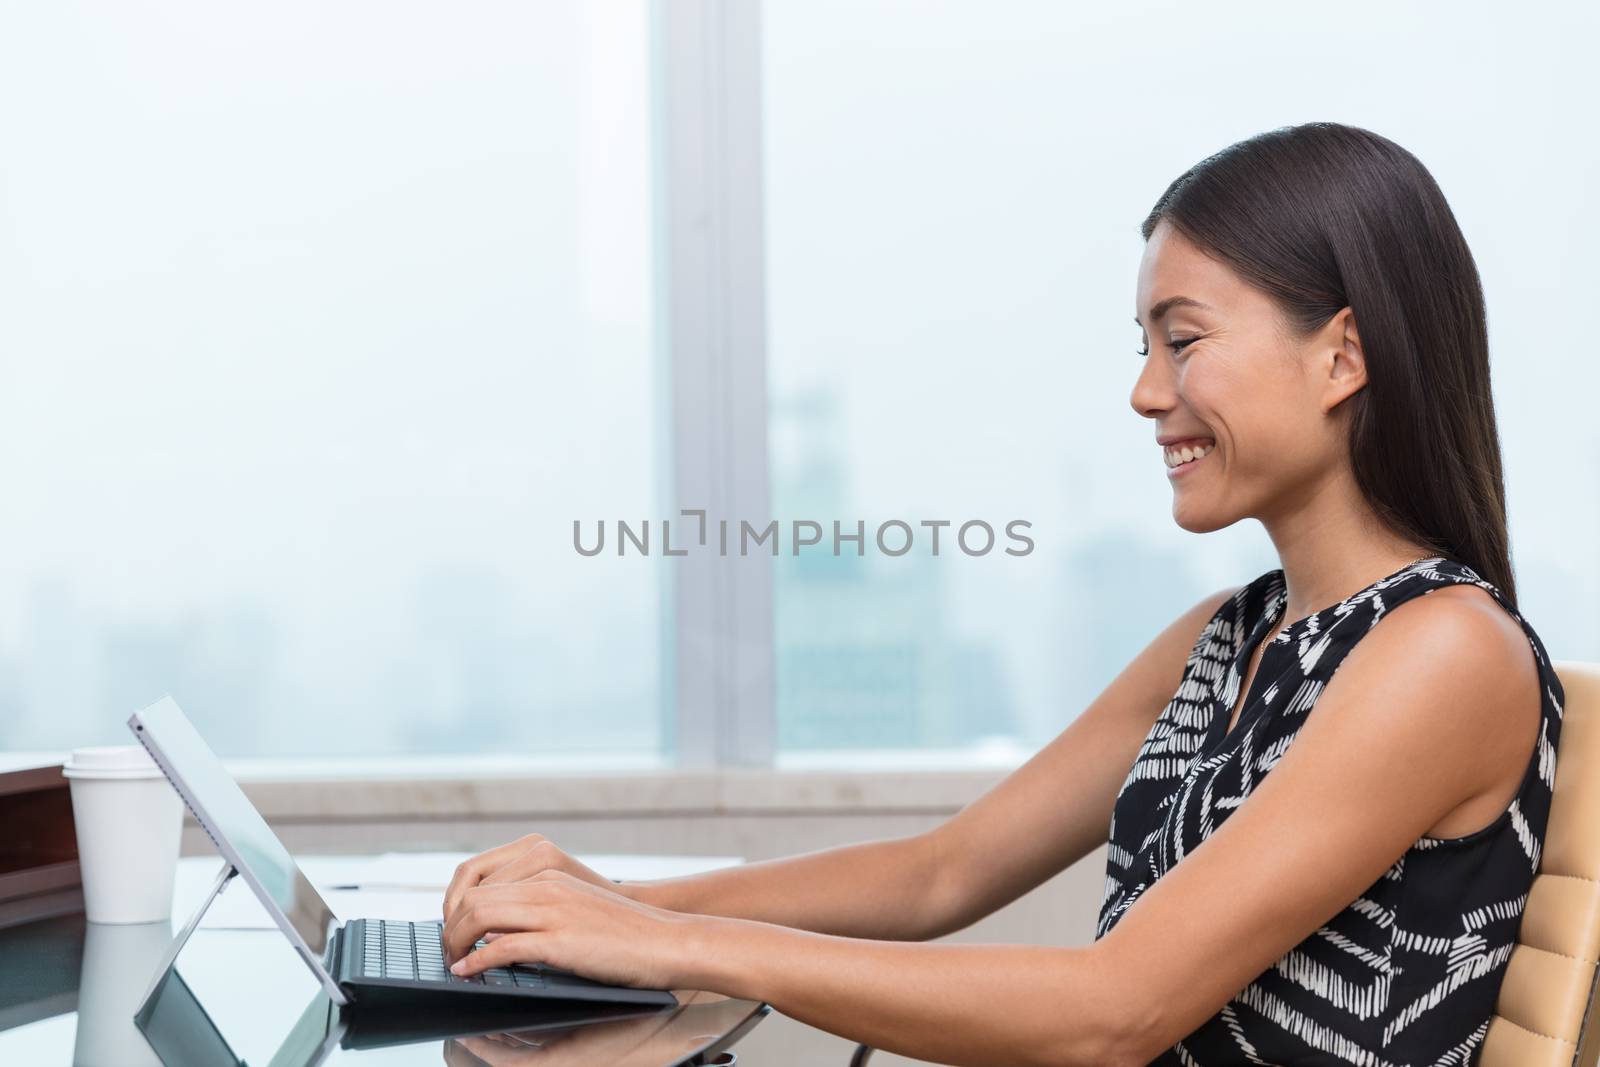 Asian business woman using laptop at work or home office shopping online or typing for job.